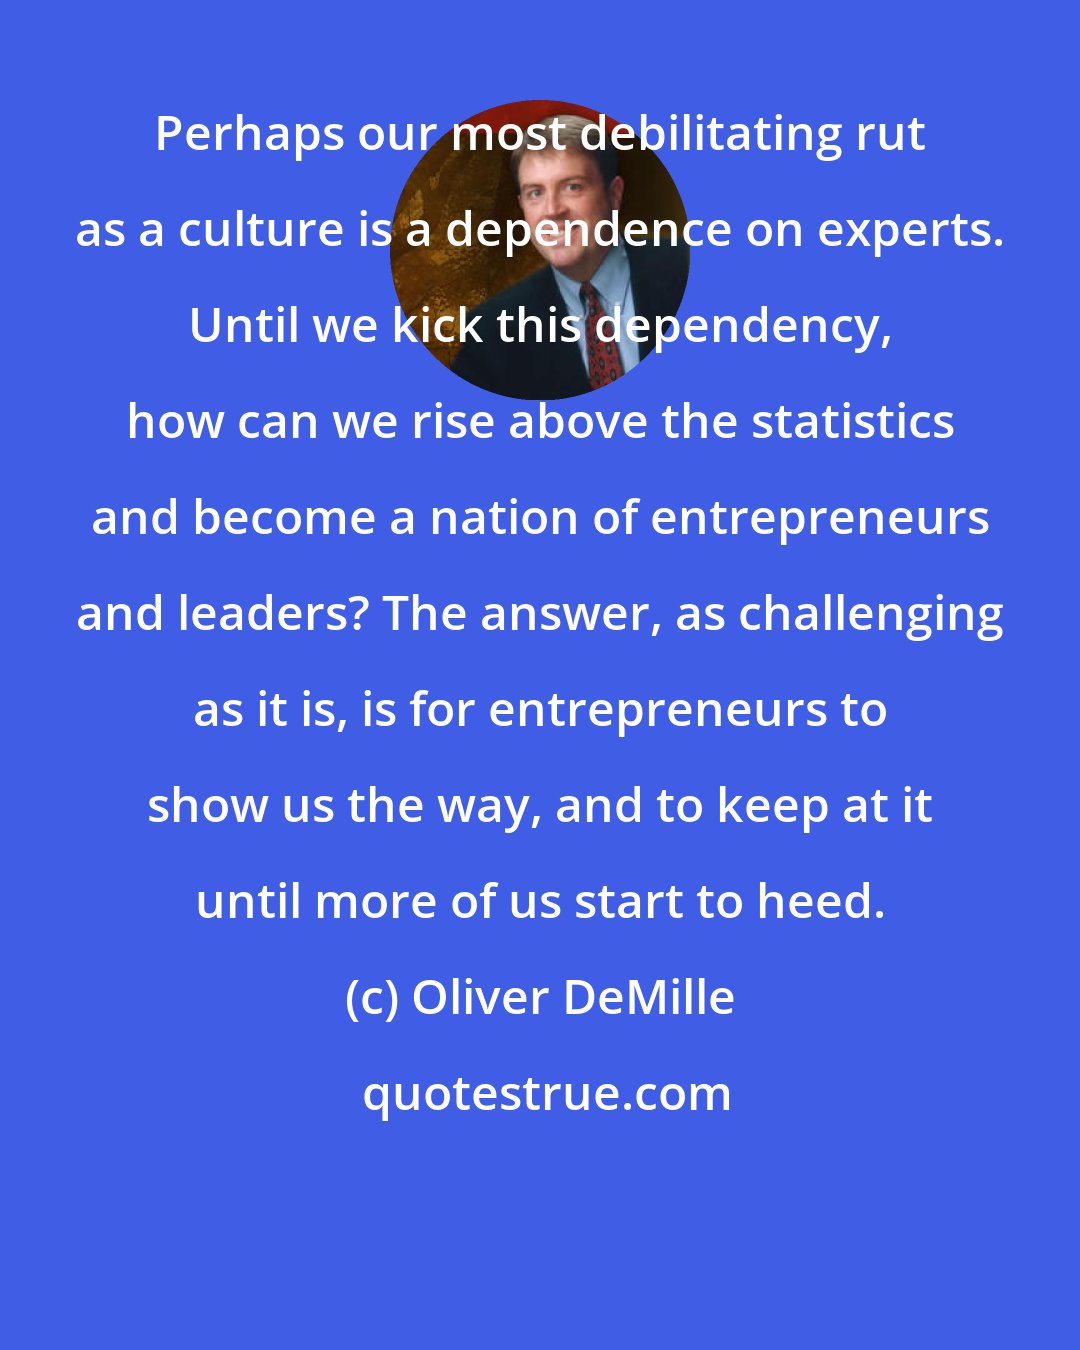 Oliver DeMille: Perhaps our most debilitating rut as a culture is a dependence on experts. Until we kick this dependency, how can we rise above the statistics and become a nation of entrepreneurs and leaders? The answer, as challenging as it is, is for entrepreneurs to show us the way, and to keep at it until more of us start to heed.